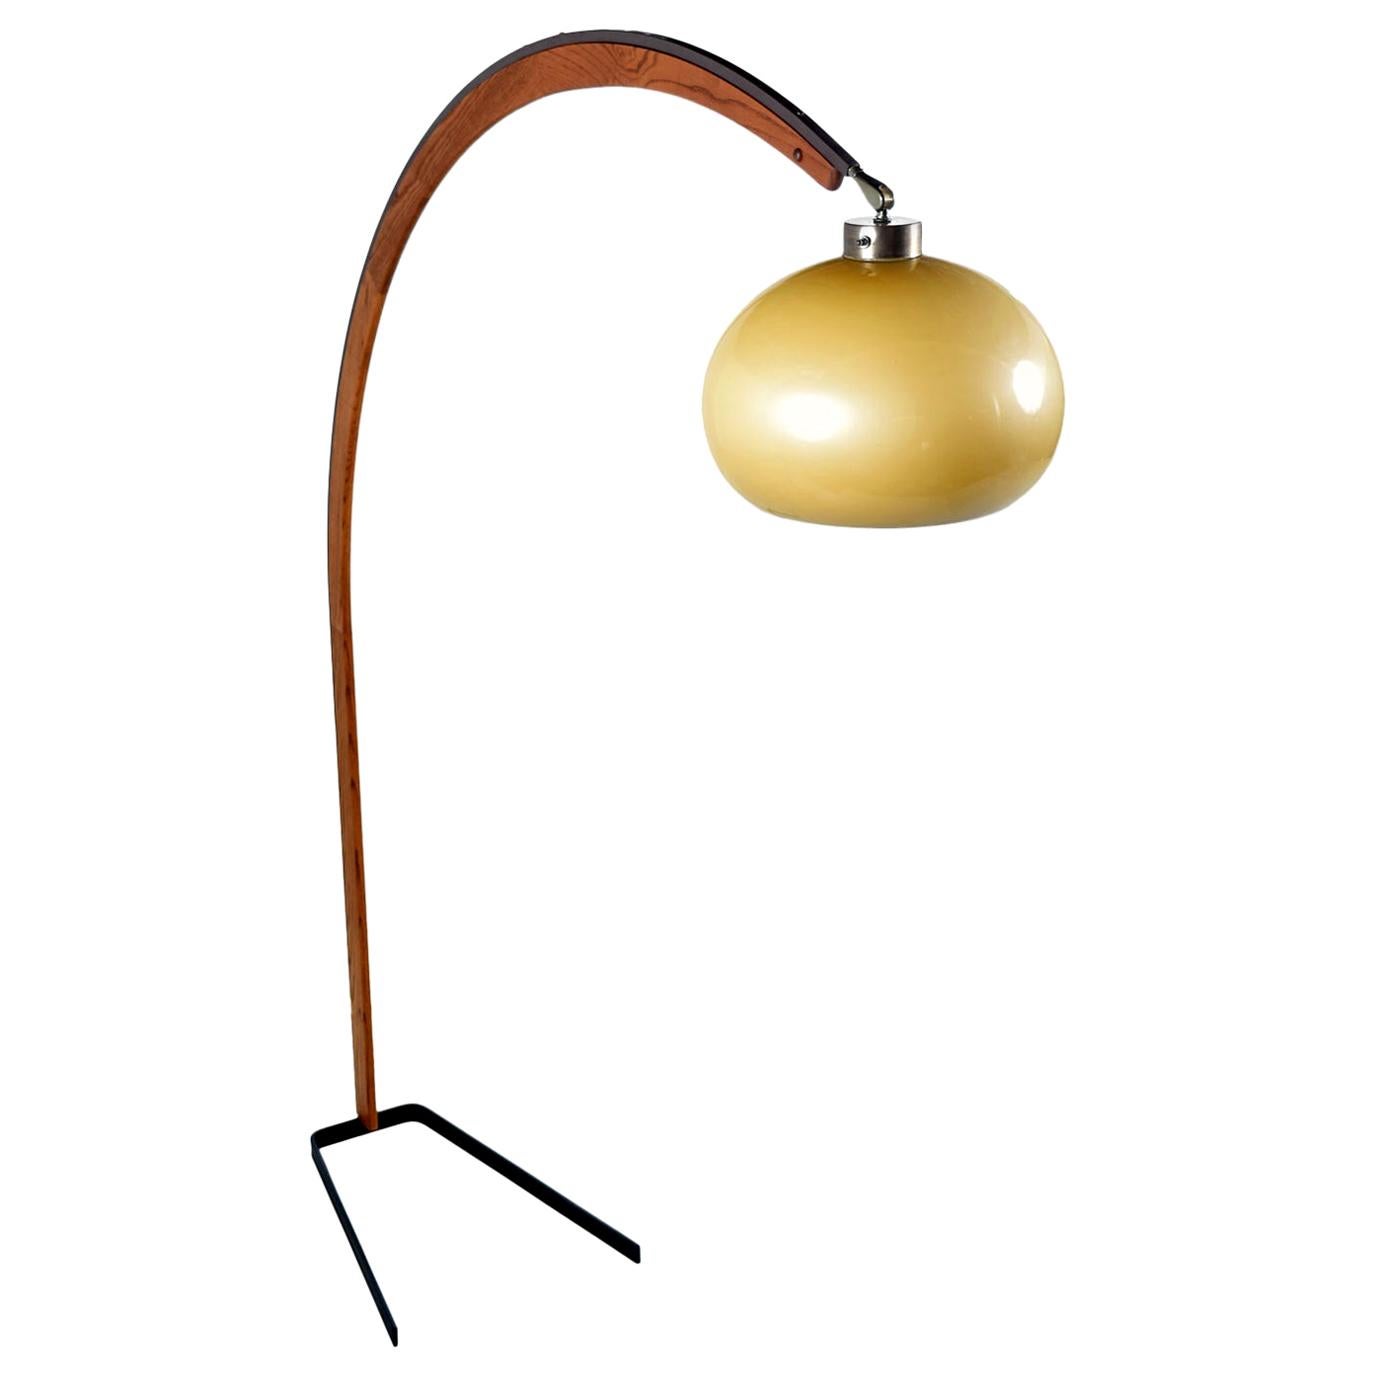 Solid American oakwood enhances the form of this arc lamp by Nova Lighting. This Postmodern design is a fresh take on the iconic arc lamp by Harvey Guzzini. The lamp is both sturdy and beautiful with more visual presence than the Minimalist Guzzini